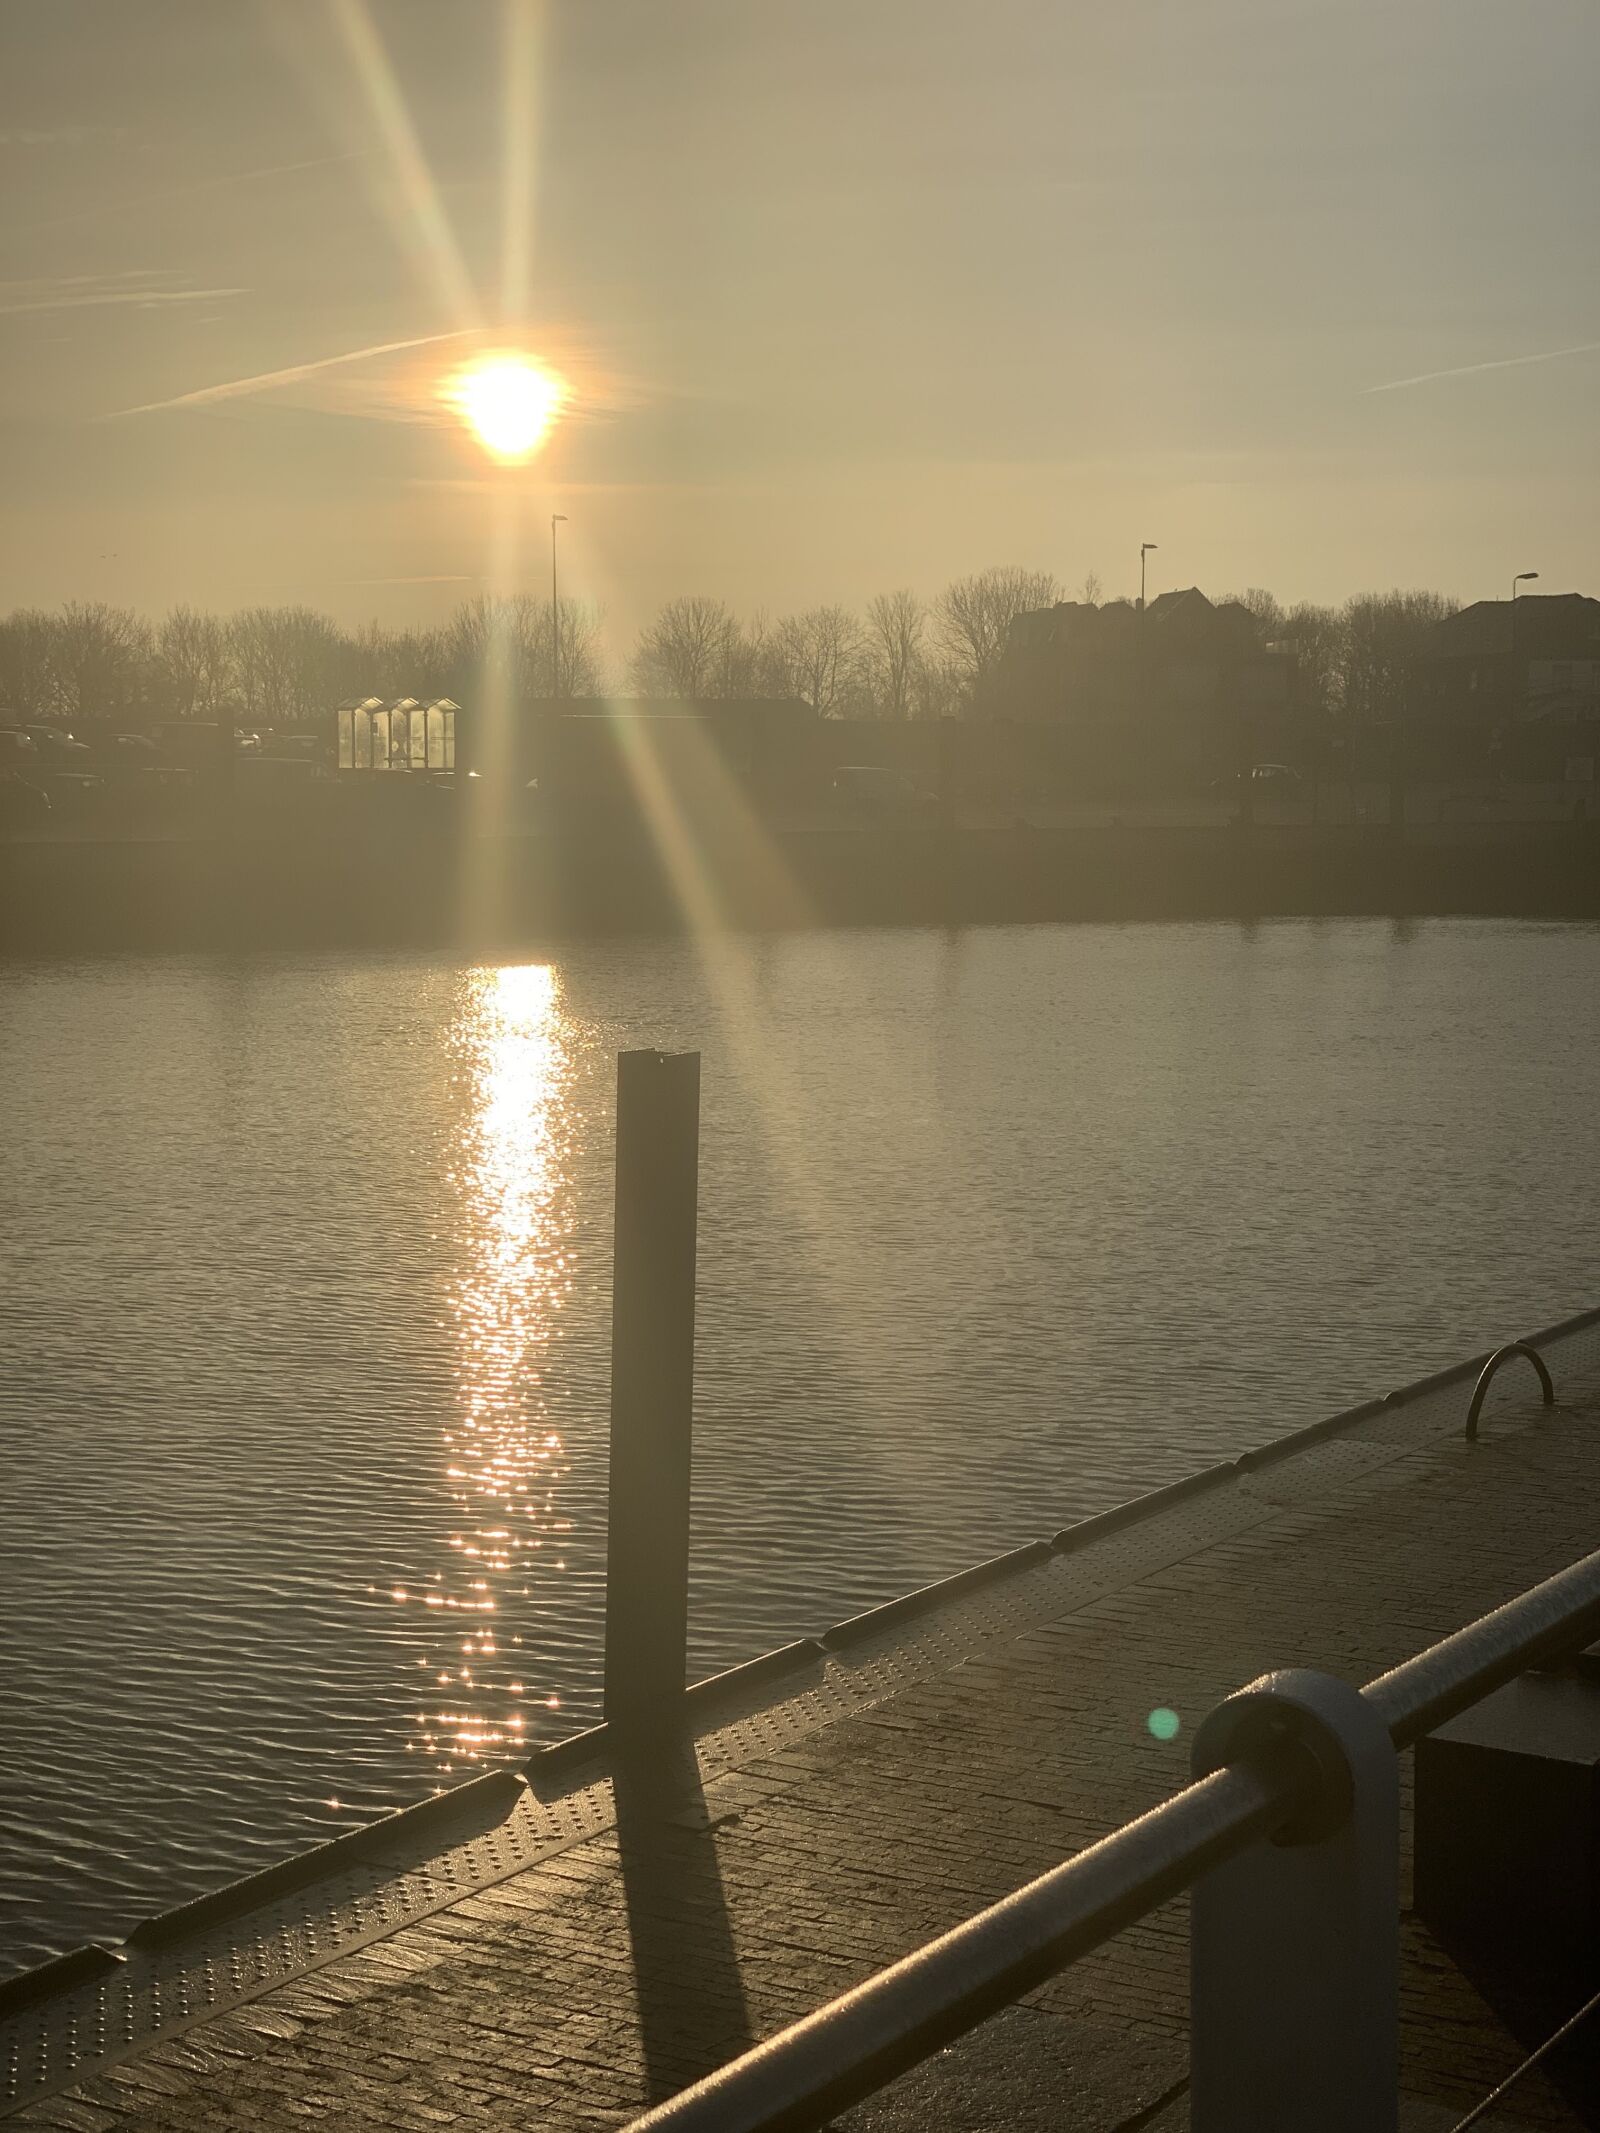 iPhone XS back dual camera 6mm f/2.4 sample photo. Sonnenaufgang, hafen, meer photography